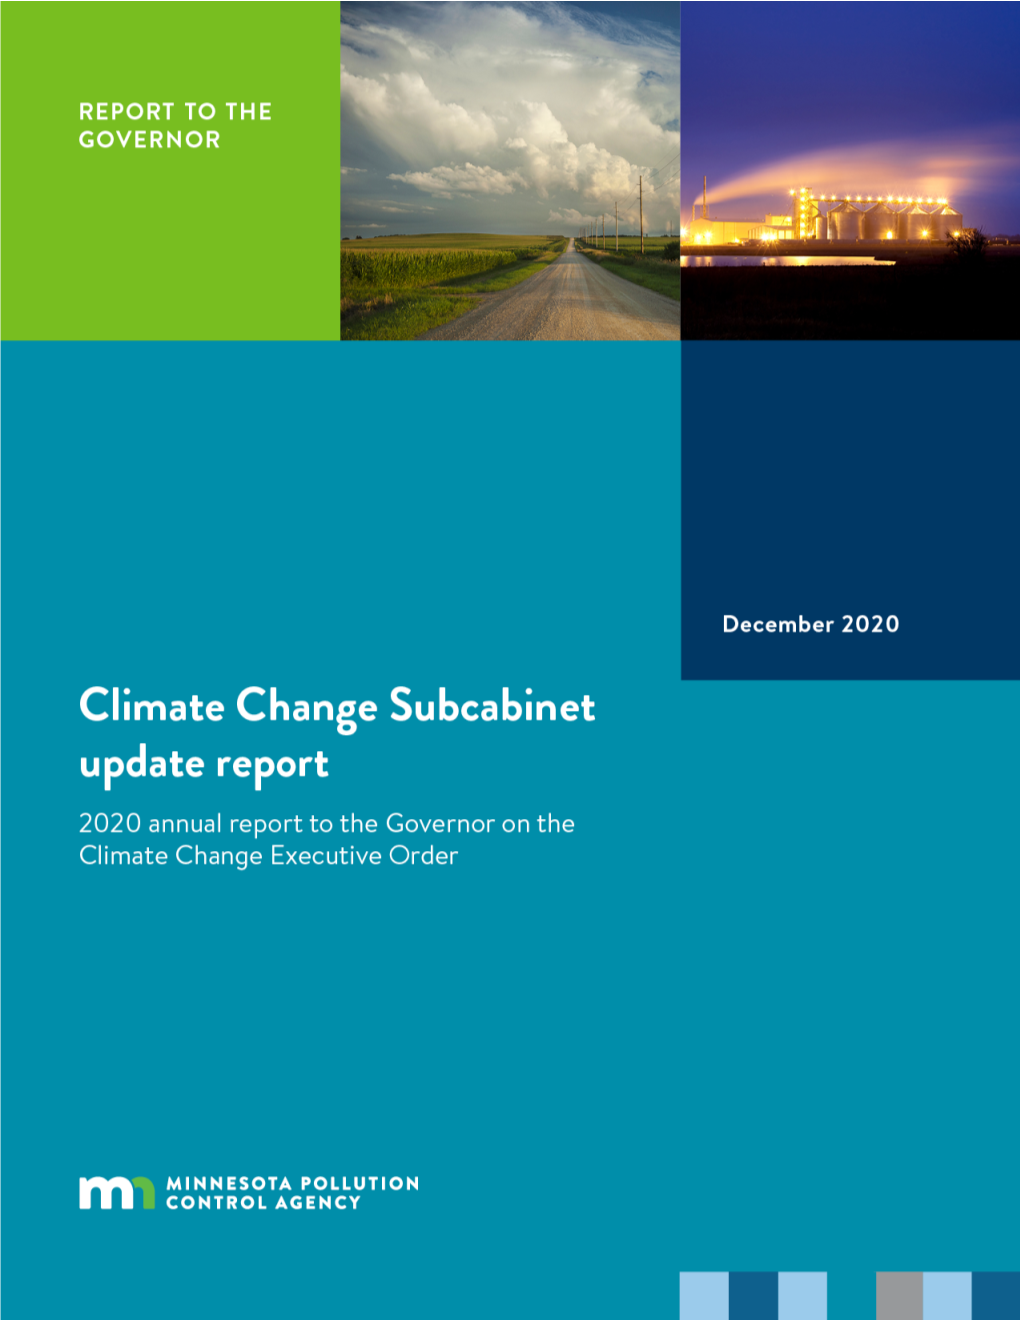 2020 Climate Change Subcabinet Update Report to the Governor